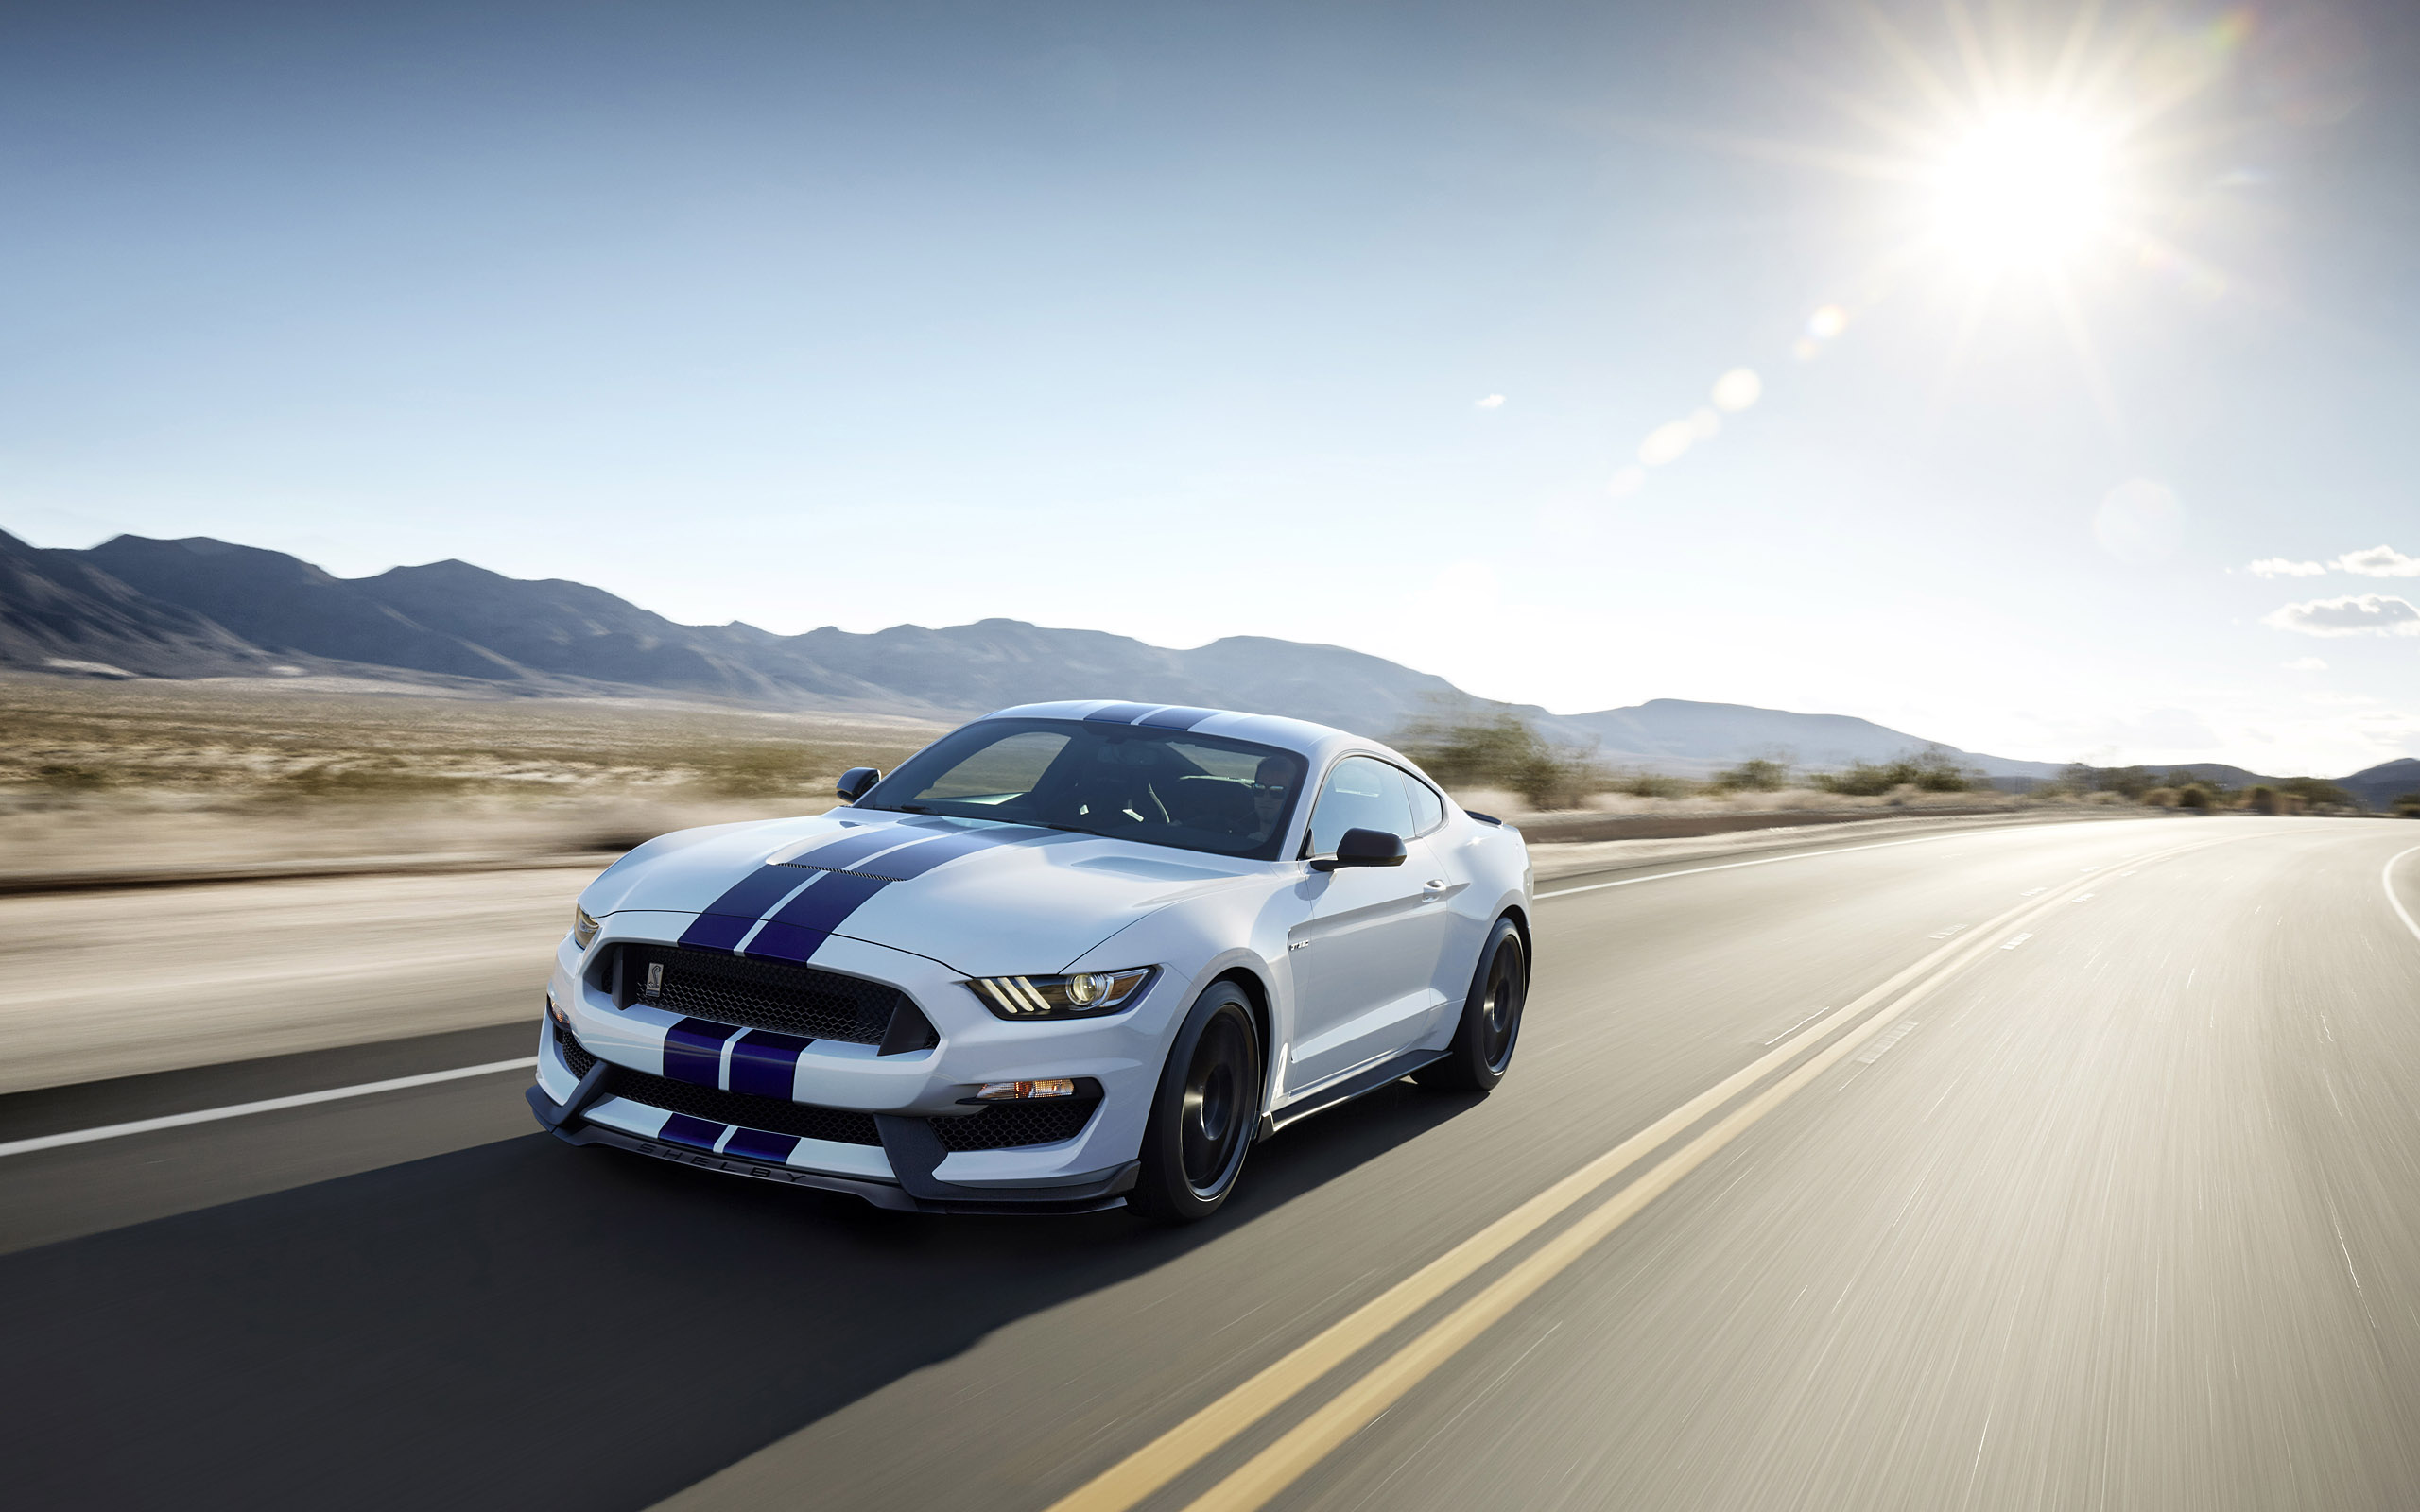  2016 Ford Shelby Mustang GT350 Wallpaper.